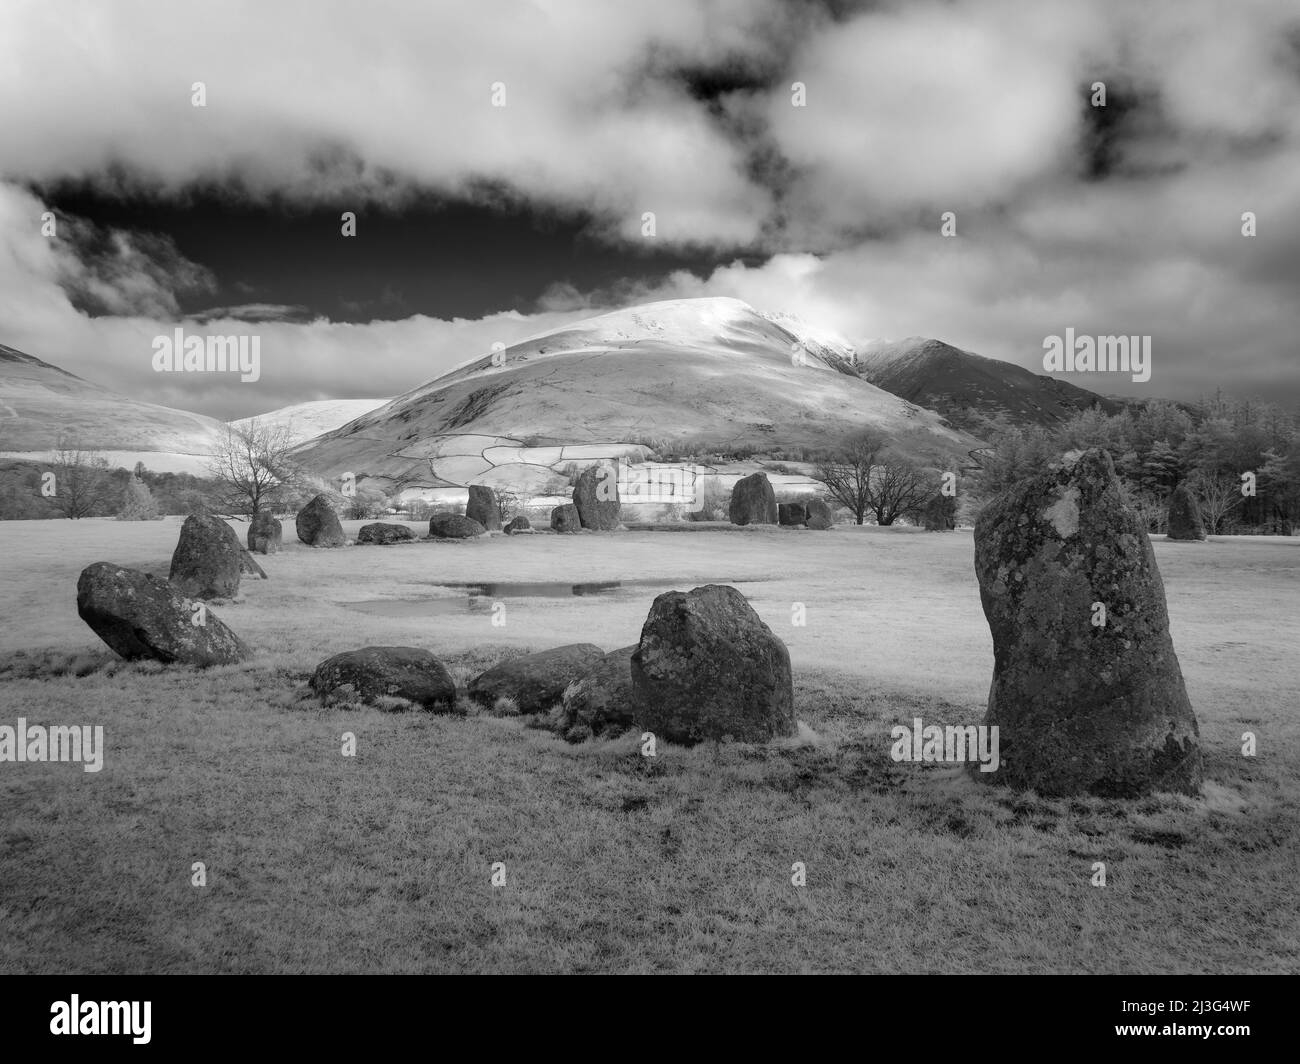 An infrared image of Castlerigg Stone Circle with Blencathra or Saddleback fell beyond in the English Lake District National Park, Cumbria, England. Stock Photo